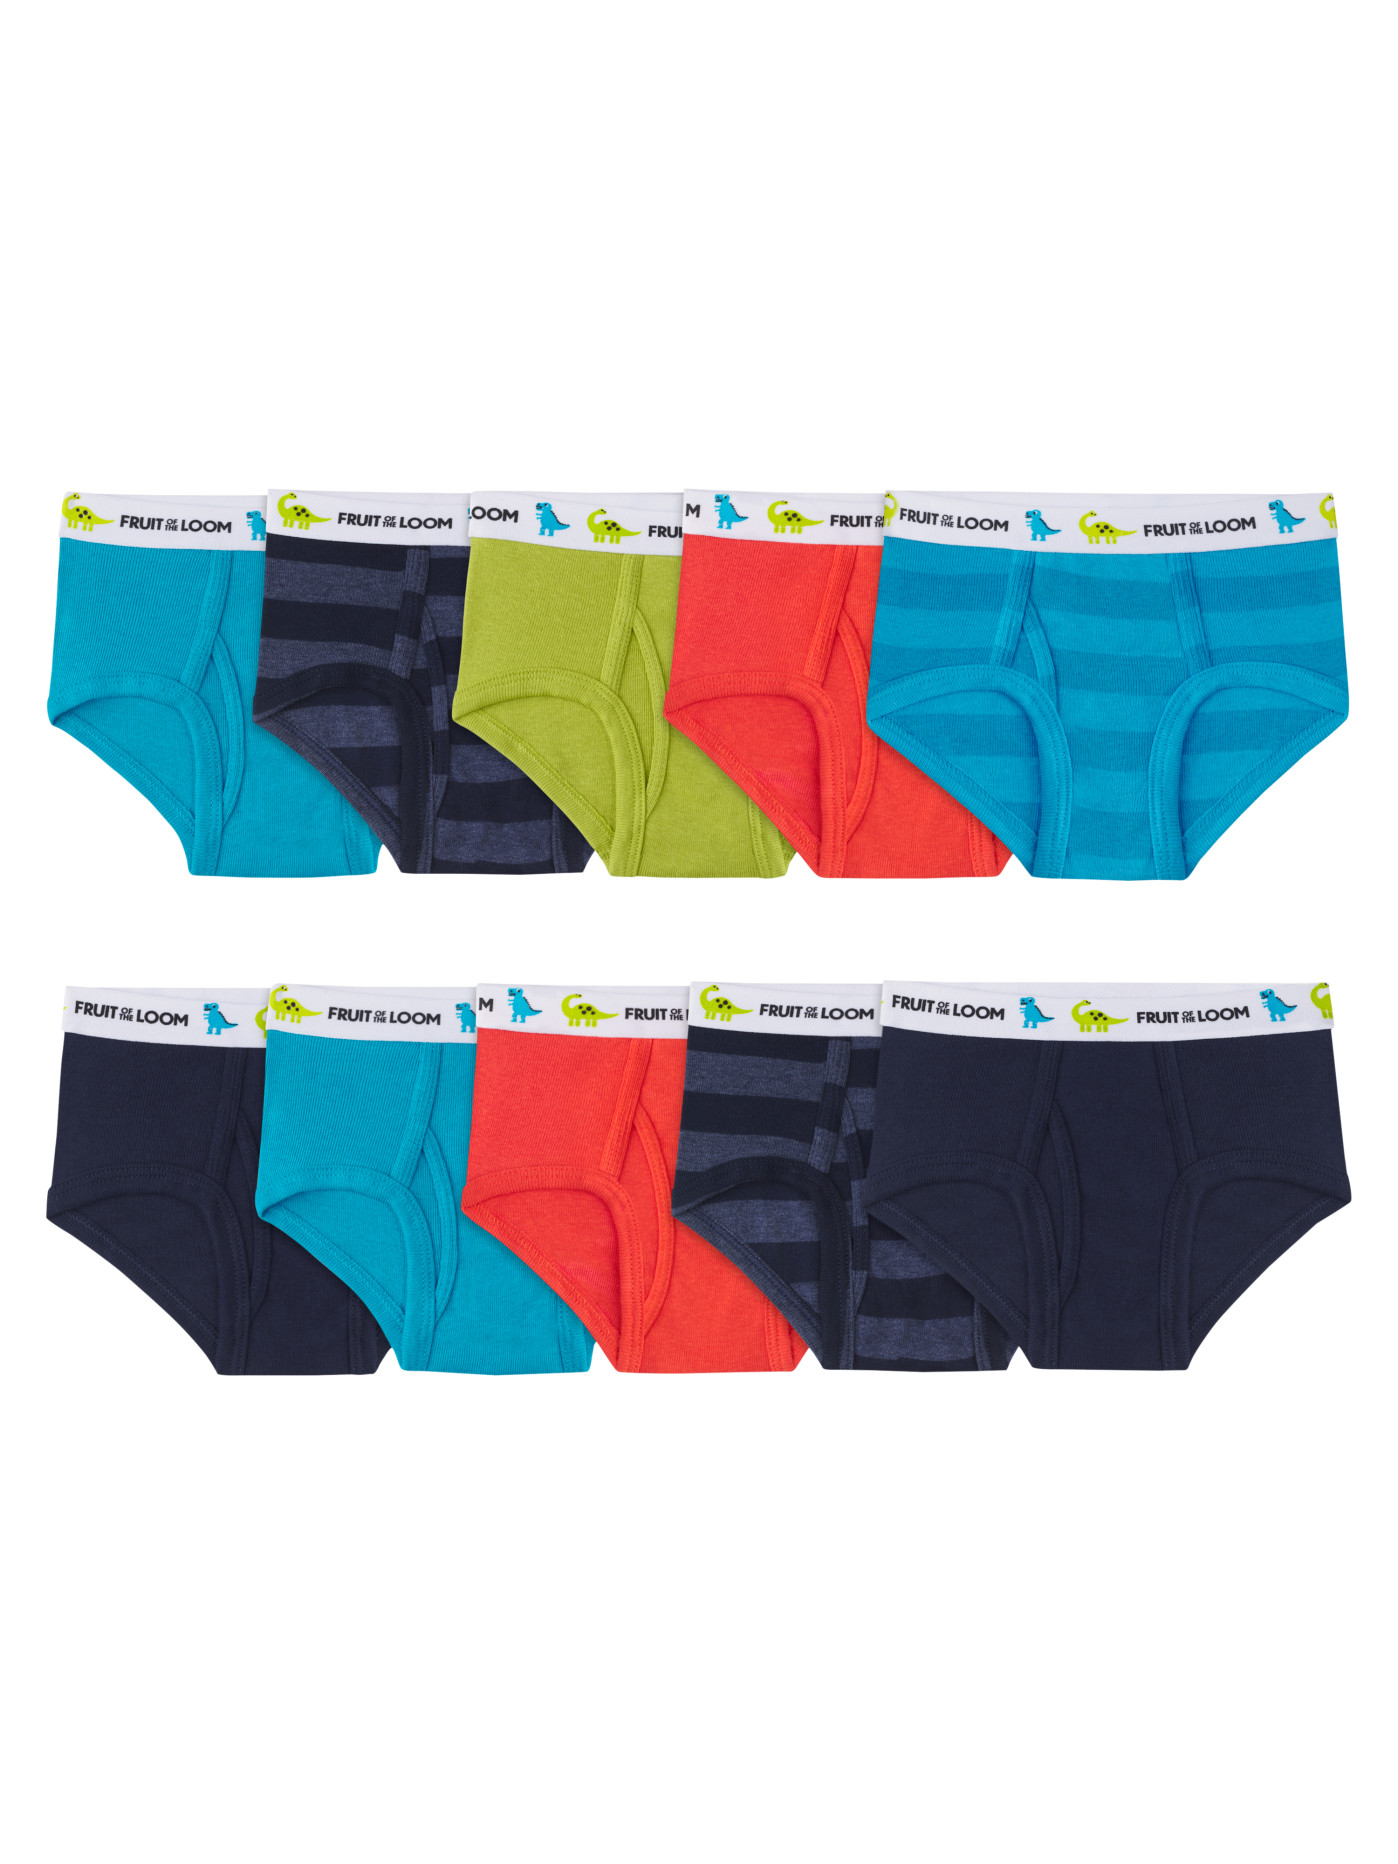 Fruit of the Loom Toddler Girl EverSoft Brief Underwear, 10 Pack, Sizes  2T-5T - DroneUp Delivery